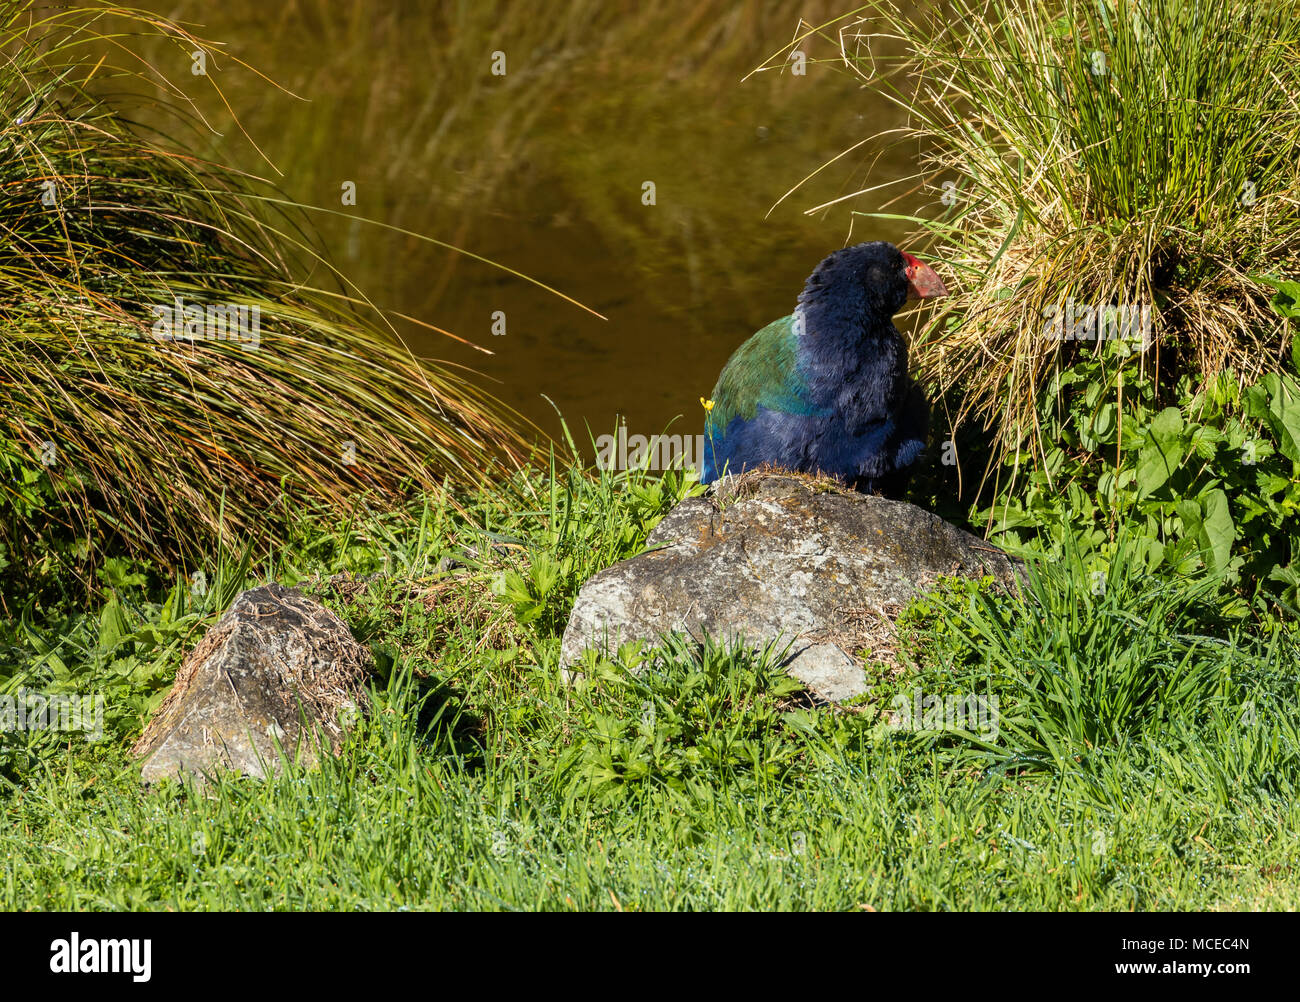 Takahe hidding behind grass plants close to water. Stock Photo